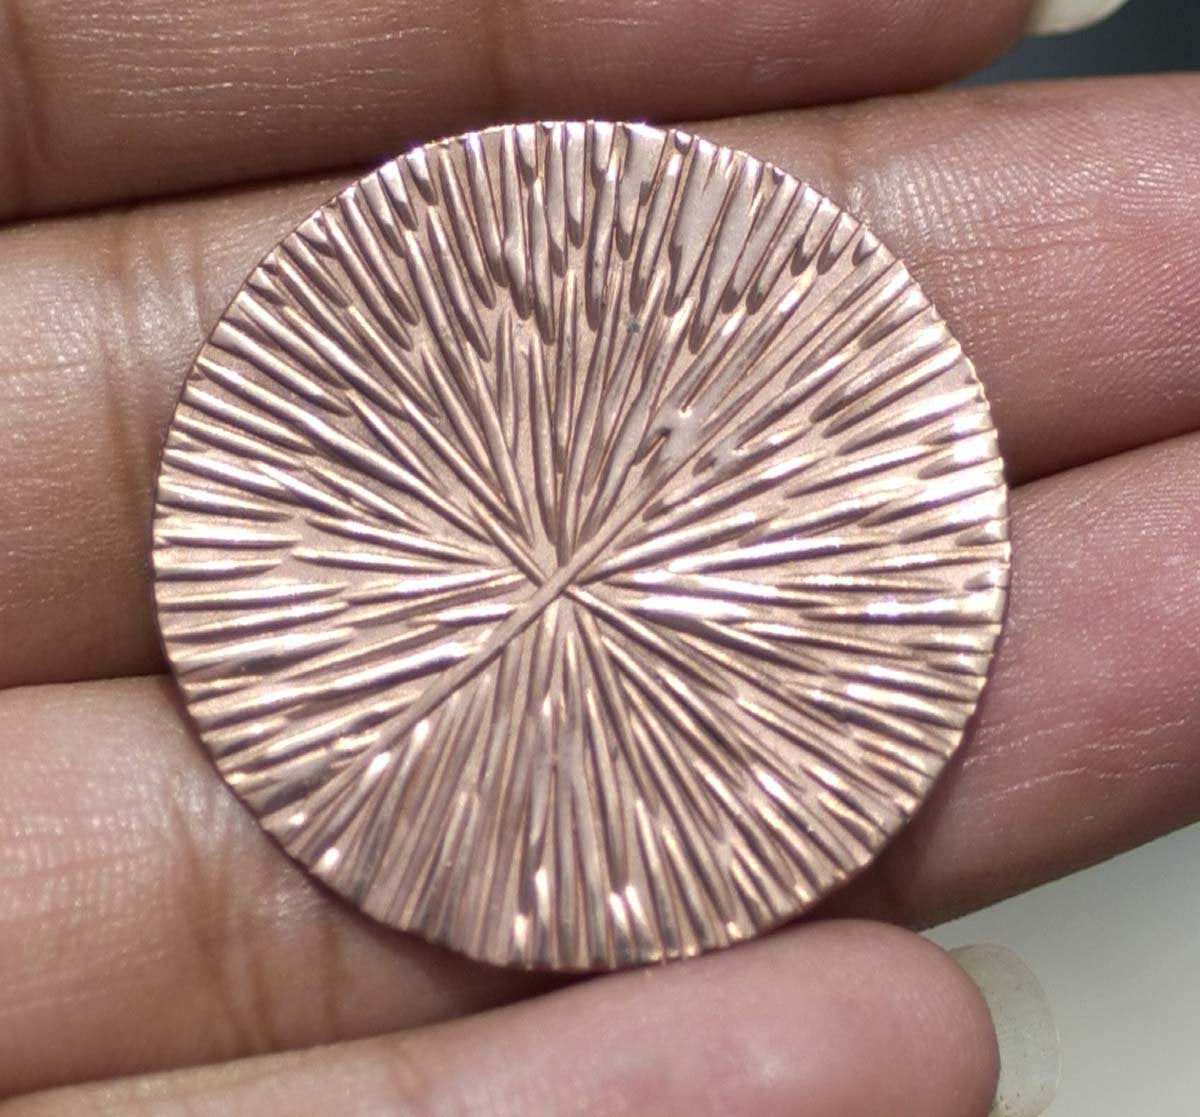 Flat Copper 30mm 24G with Texture, Enameling Soldering Stamping Charms - 4 Pieces